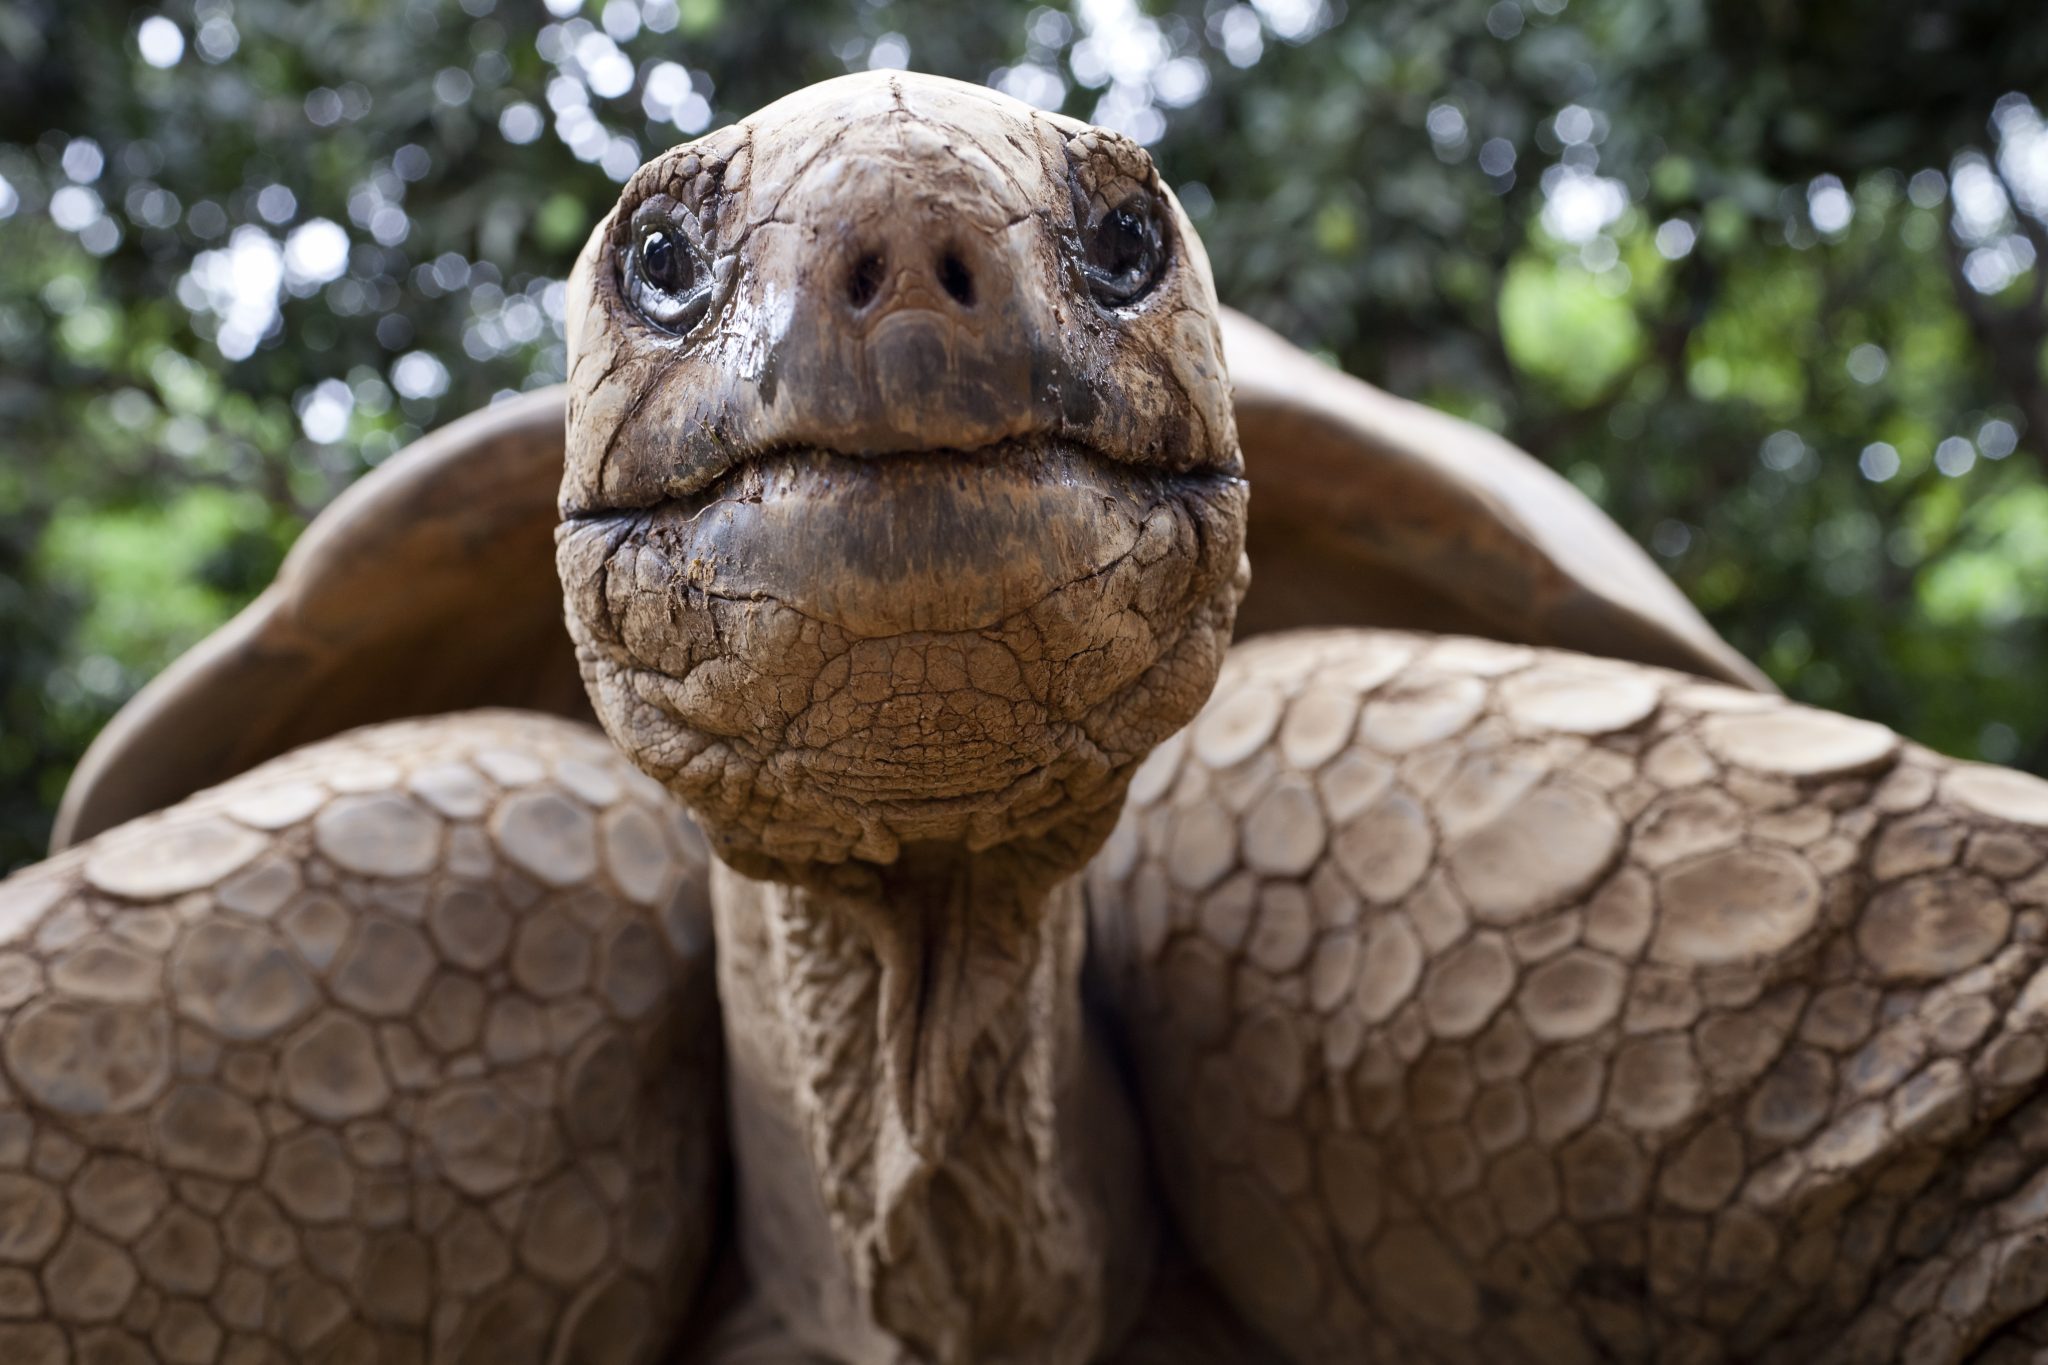 This 100-year-old Galapagos giant tortoise has fathered over 1,000 children